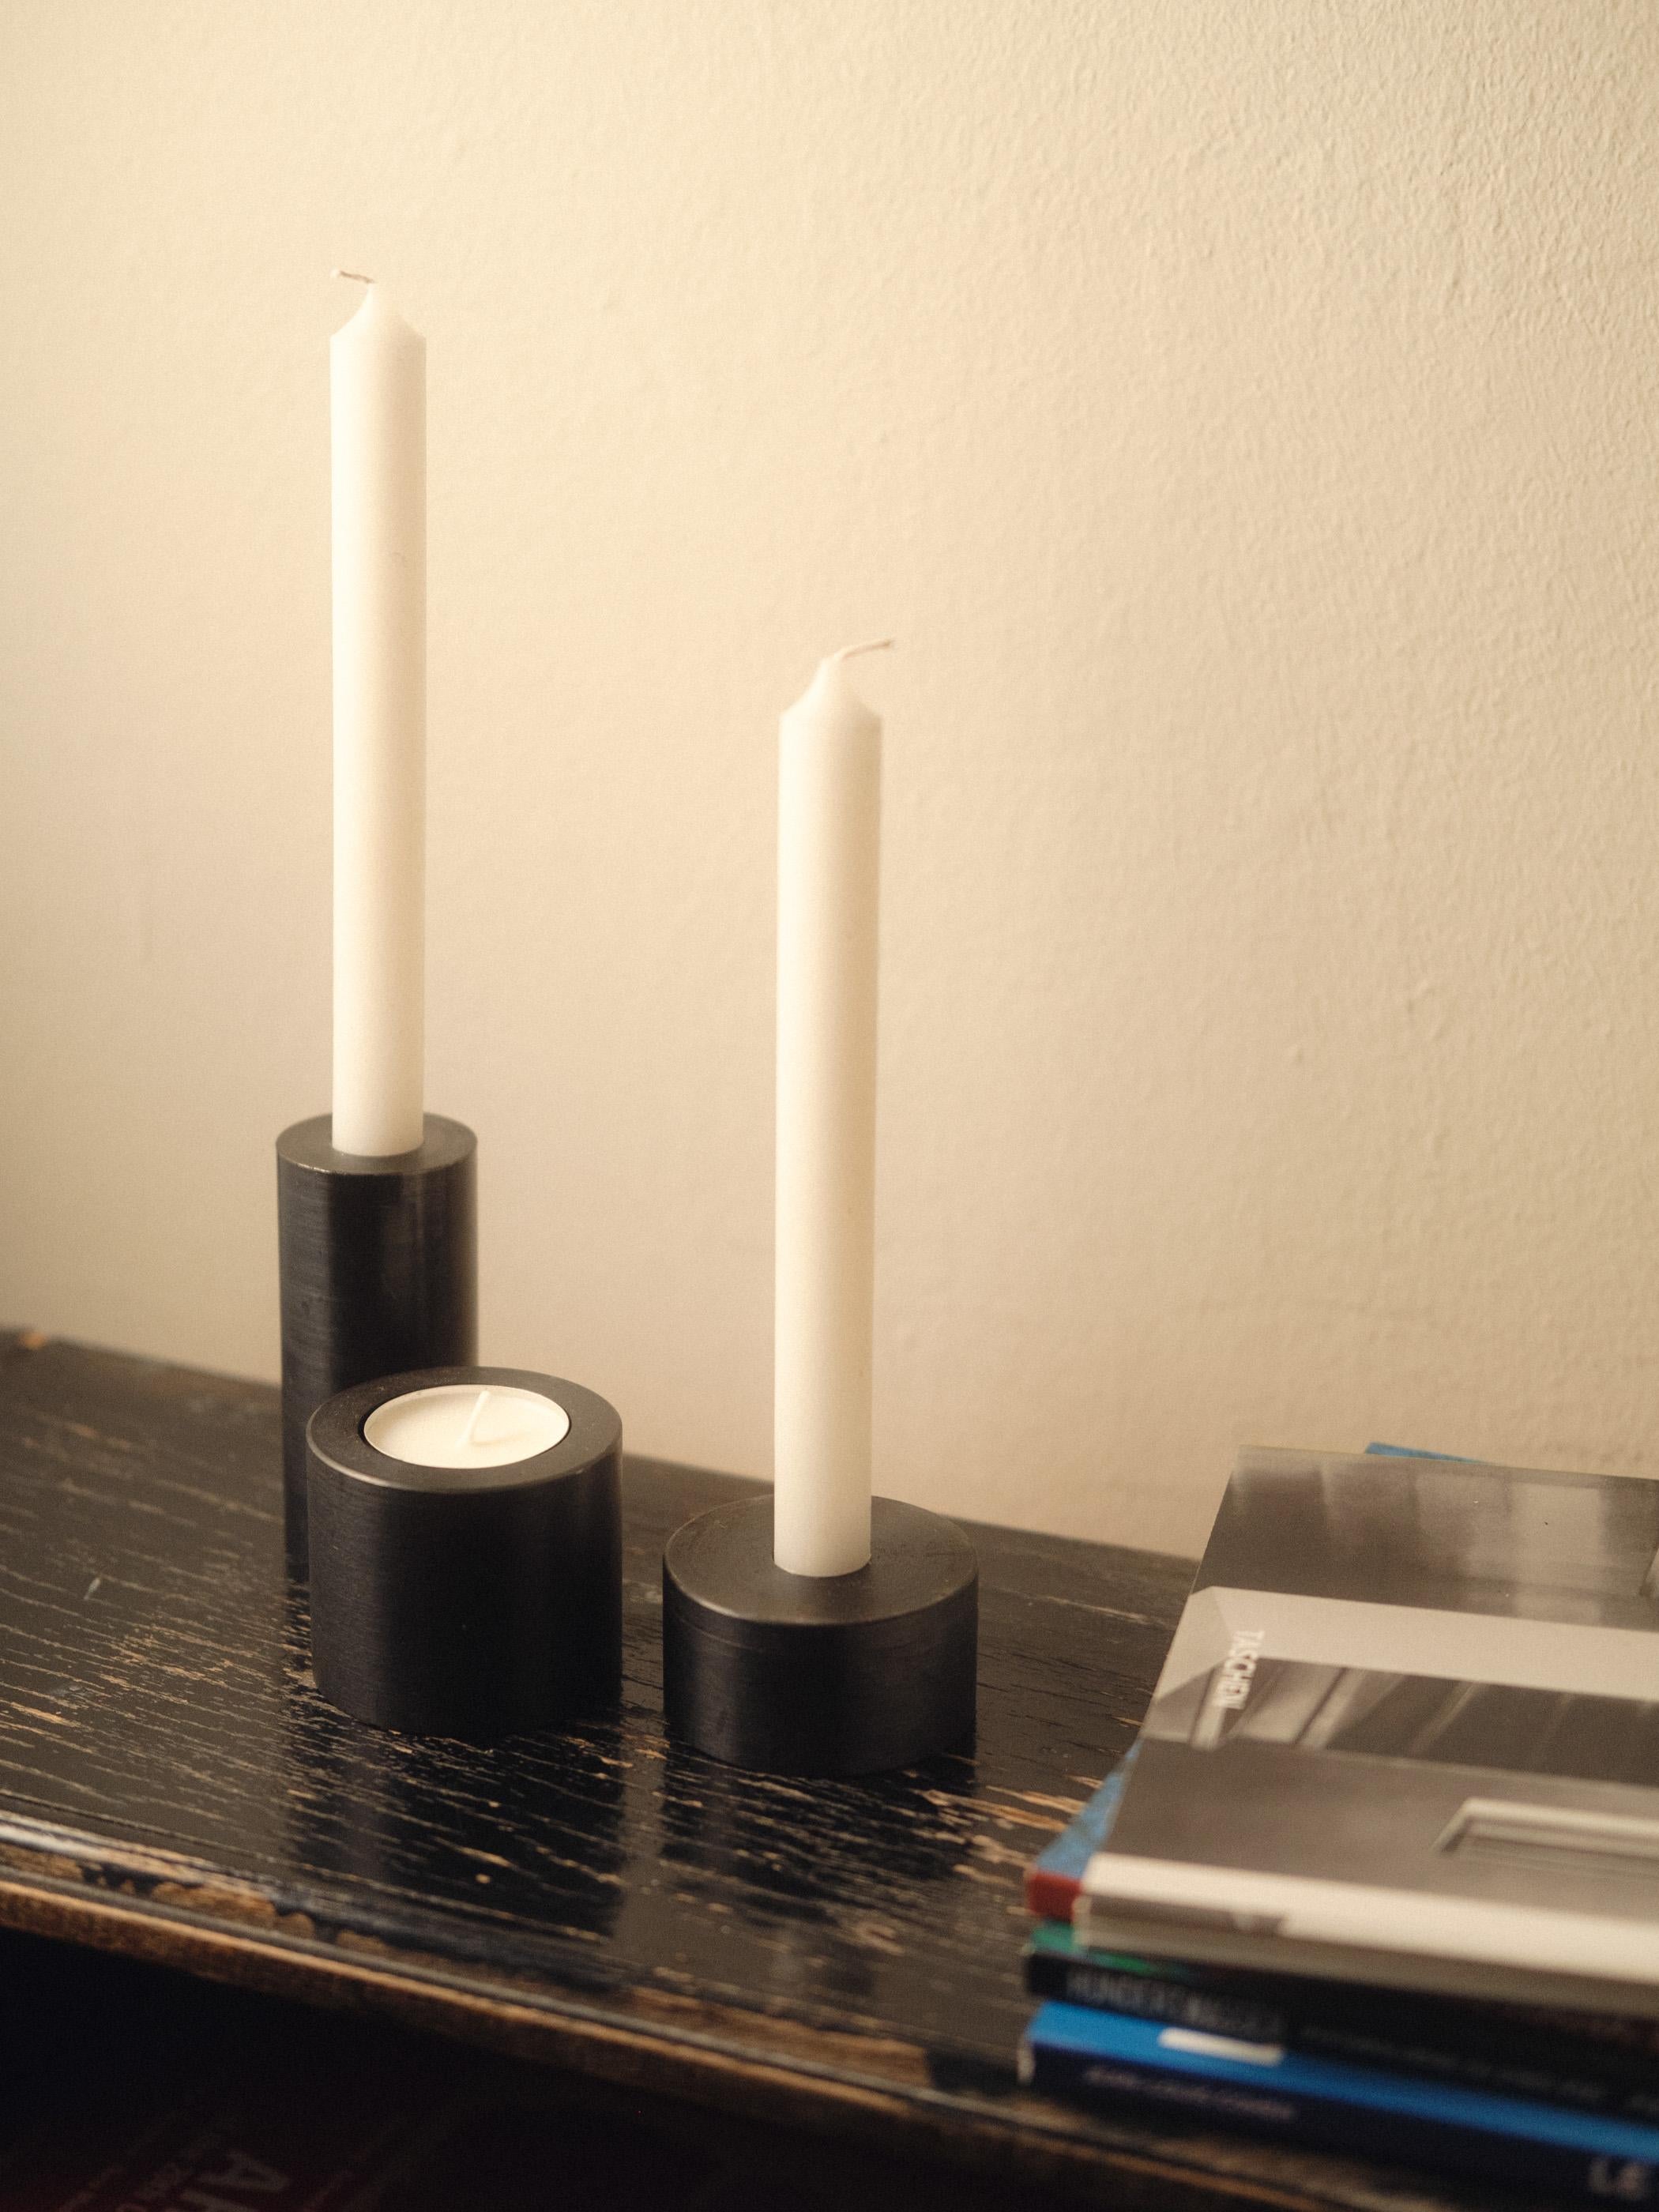 Steel another candleholder by Radu Abraham
Materials: Steel
Dimensions: D8 x H14cm

3 piece candle holder; can be used with multiple types of candles or with standard candle pill; if detached from each other, each element can be used as a small